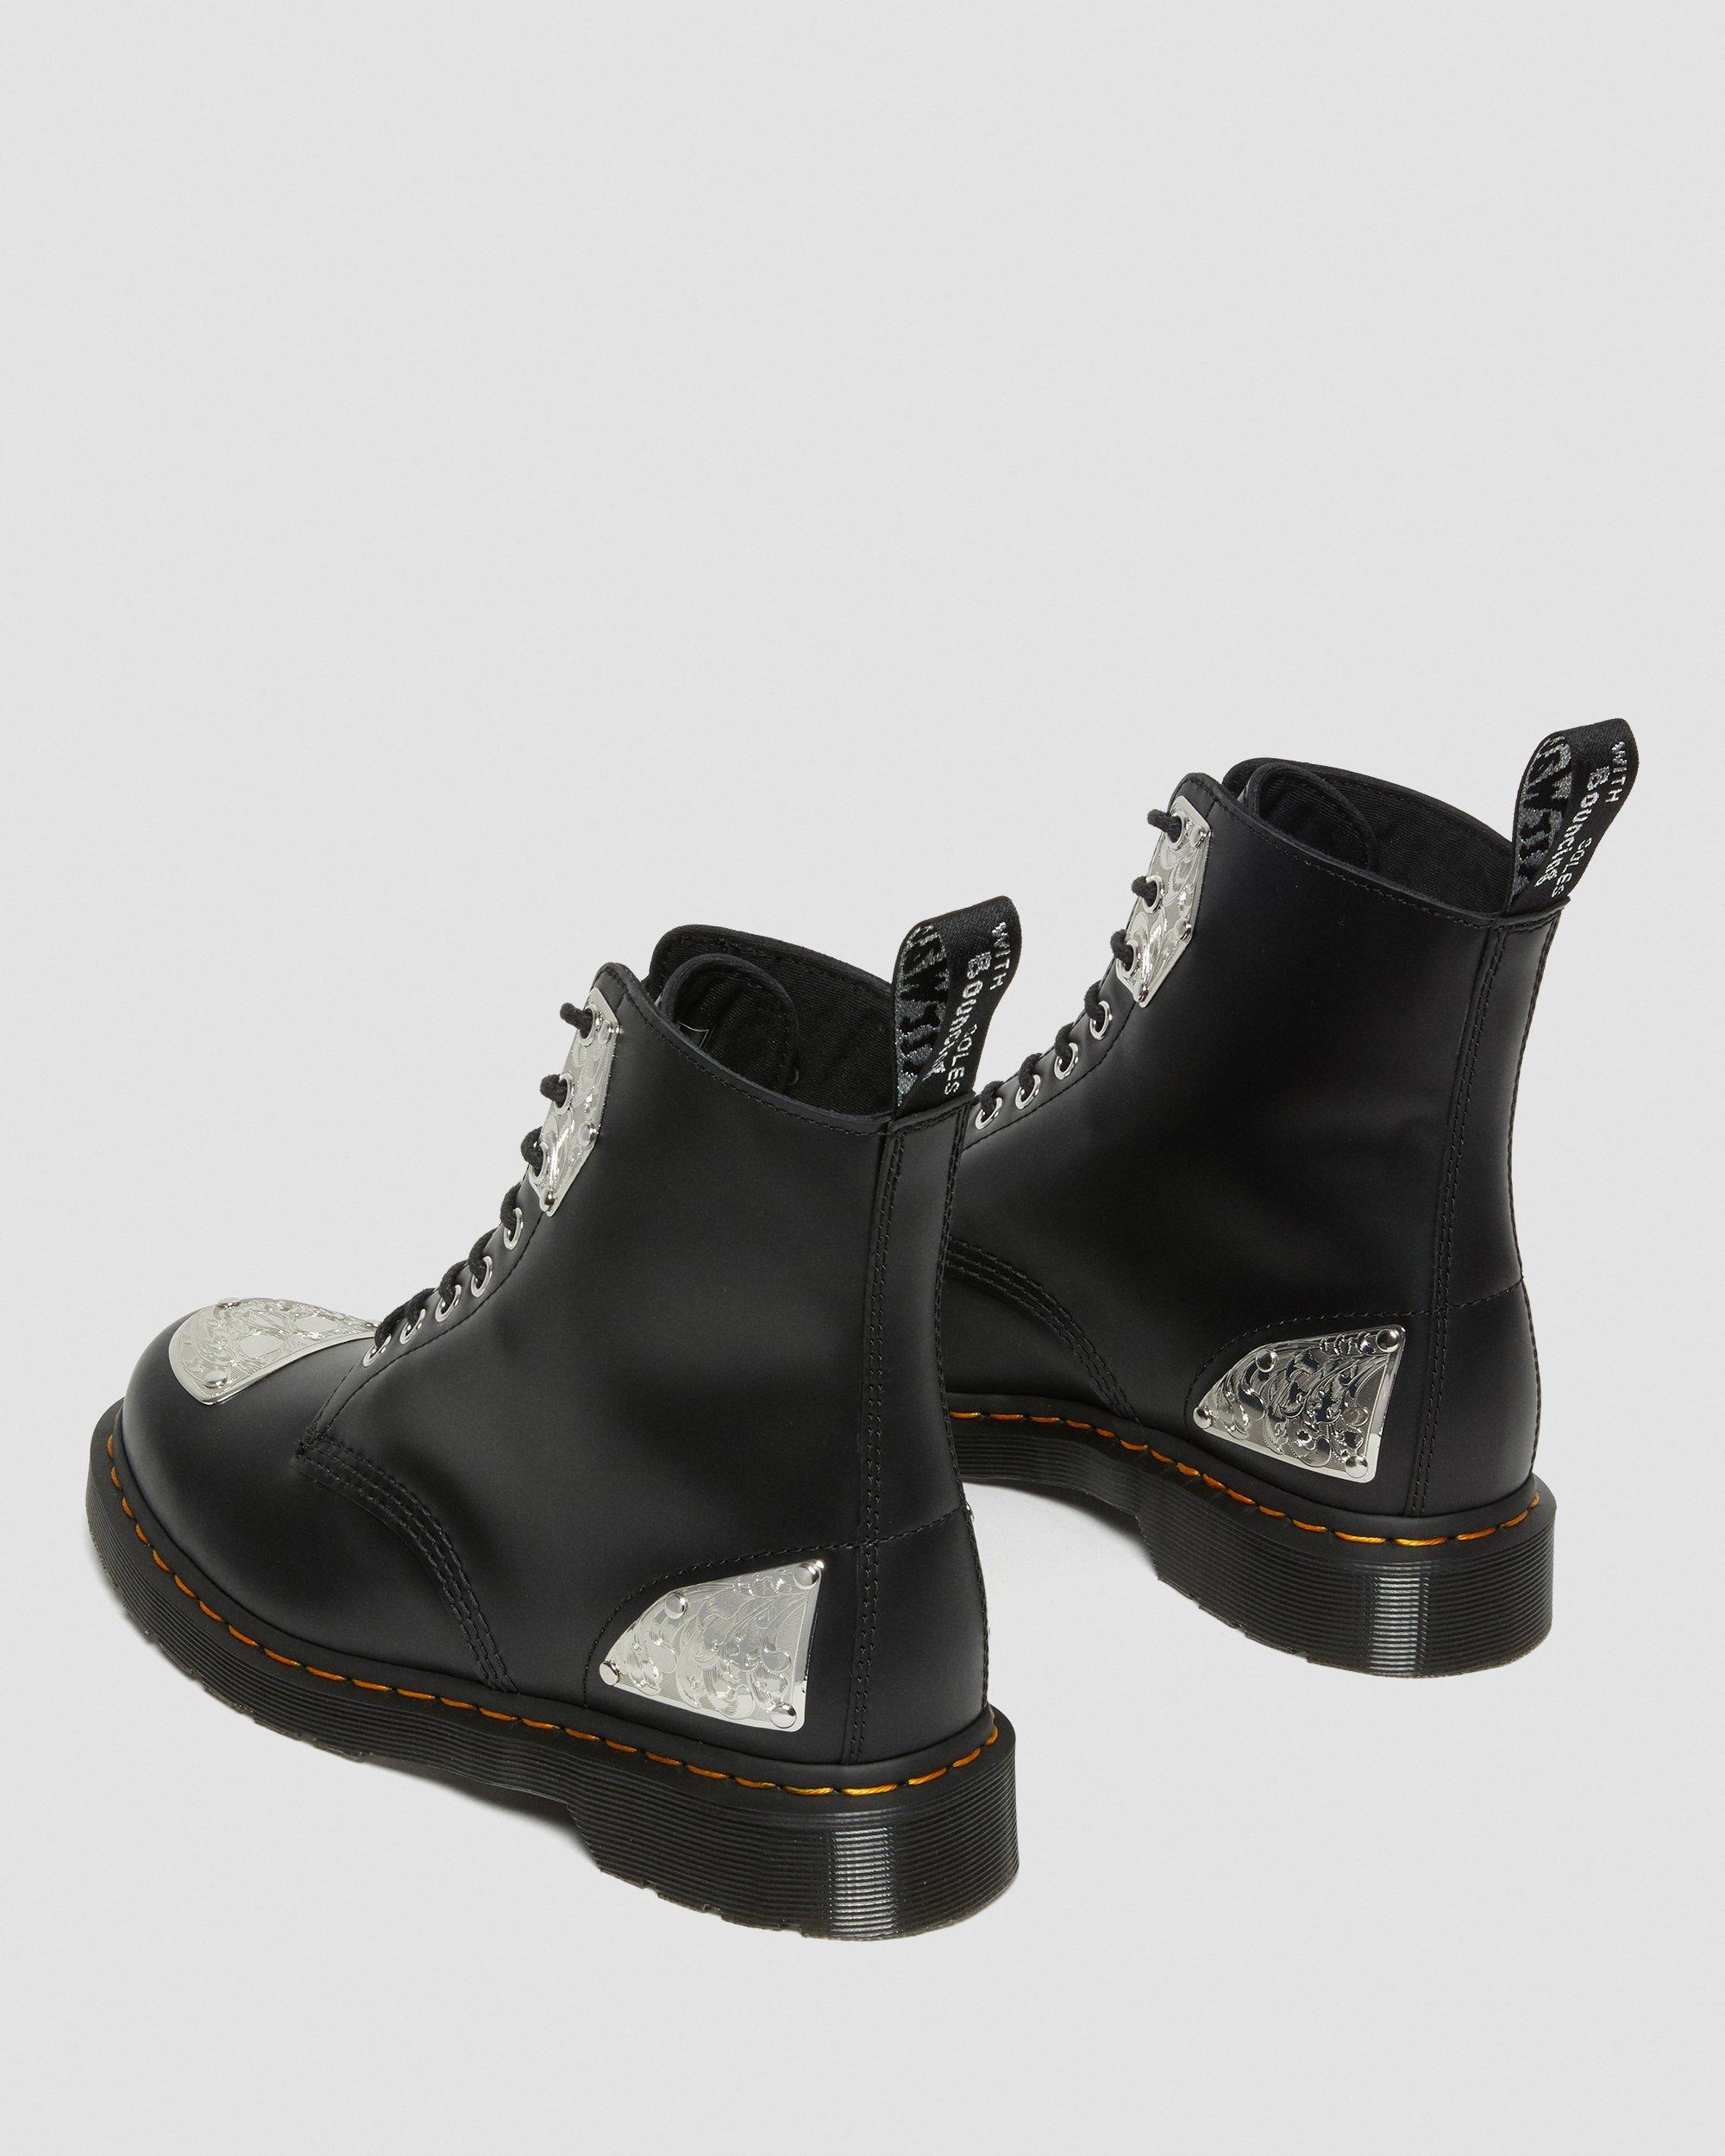 Dr. Martens King Nerd 1460 Leather Lace Up Boots in Black | Lyst